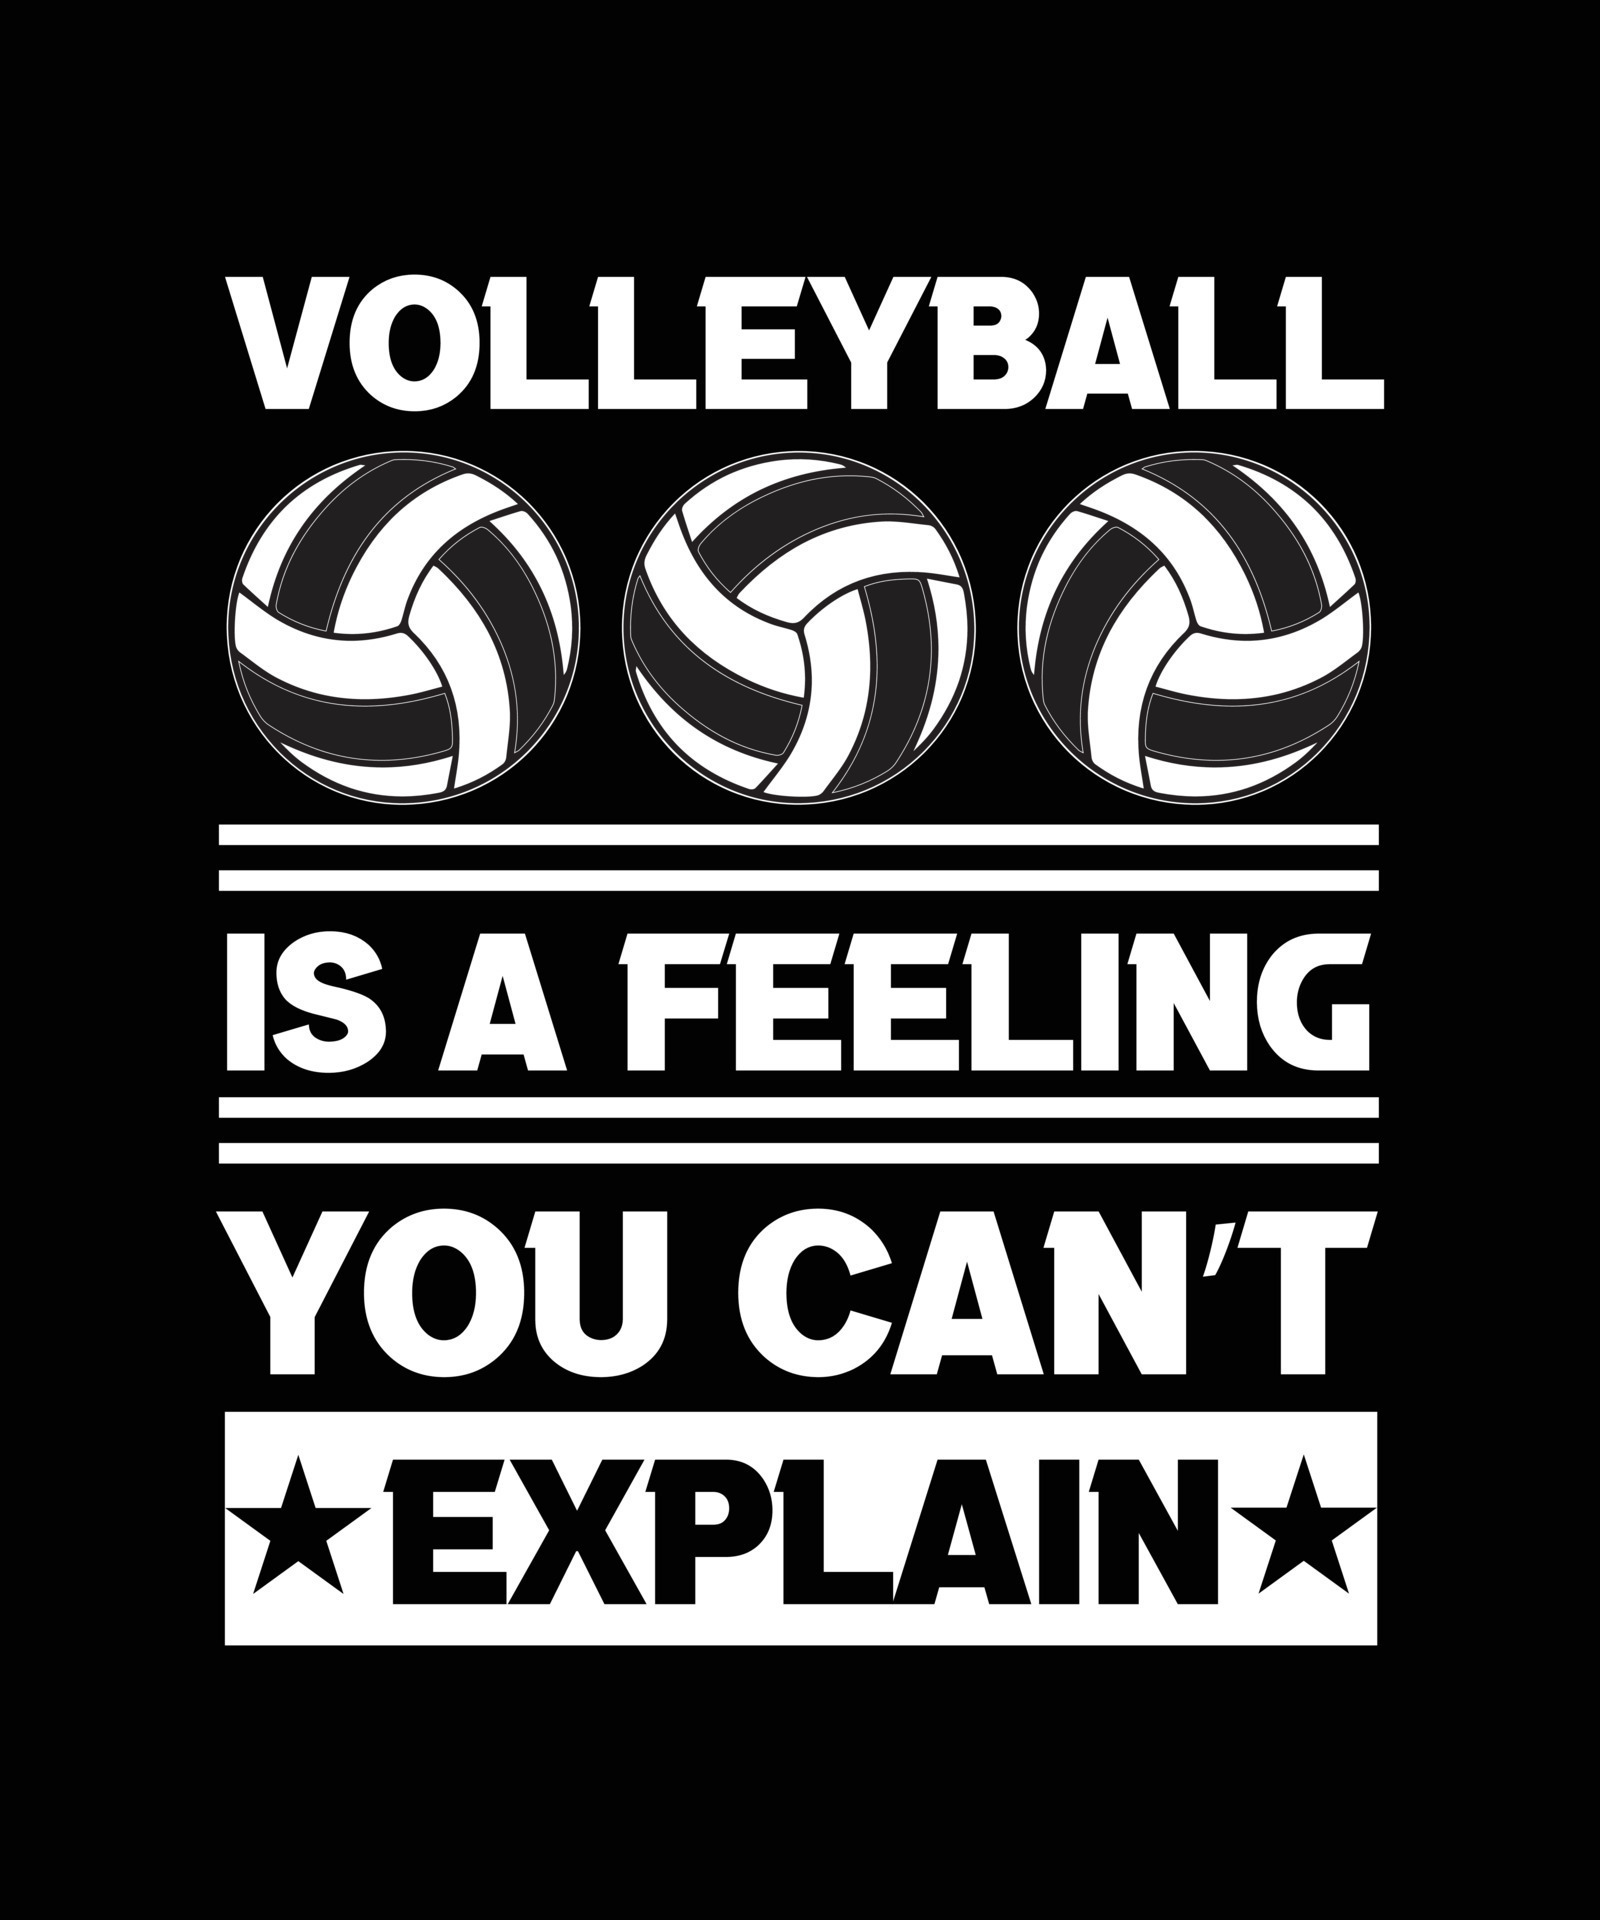 VOLLEYBALL IS A FEELING YOU CAN'T EXPLAIN. T-SHIRT DESIGN. PRINT ...